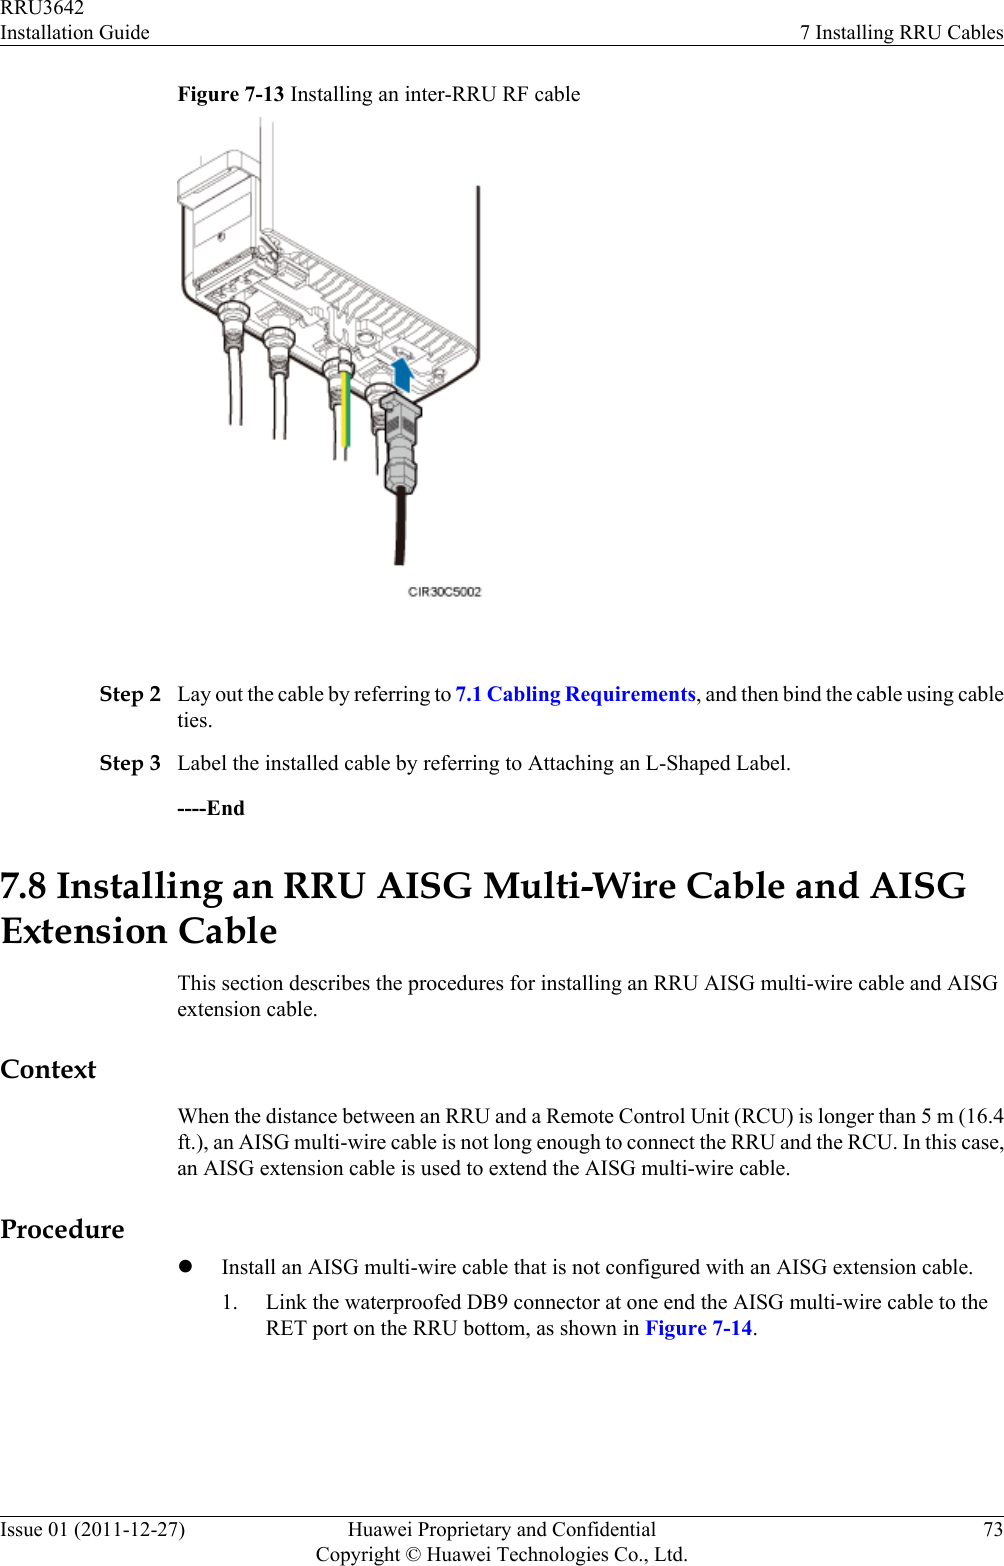 Figure 7-13 Installing an inter-RRU RF cable Step 2 Lay out the cable by referring to 7.1 Cabling Requirements, and then bind the cable using cableties.Step 3 Label the installed cable by referring to Attaching an L-Shaped Label.----End7.8 Installing an RRU AISG Multi-Wire Cable and AISGExtension CableThis section describes the procedures for installing an RRU AISG multi-wire cable and AISGextension cable.ContextWhen the distance between an RRU and a Remote Control Unit (RCU) is longer than 5 m (16.4ft.), an AISG multi-wire cable is not long enough to connect the RRU and the RCU. In this case,an AISG extension cable is used to extend the AISG multi-wire cable.ProcedurelInstall an AISG multi-wire cable that is not configured with an AISG extension cable.1. Link the waterproofed DB9 connector at one end the AISG multi-wire cable to theRET port on the RRU bottom, as shown in Figure 7-14.RRU3642Installation Guide 7 Installing RRU CablesIssue 01 (2011-12-27) Huawei Proprietary and ConfidentialCopyright © Huawei Technologies Co., Ltd.73